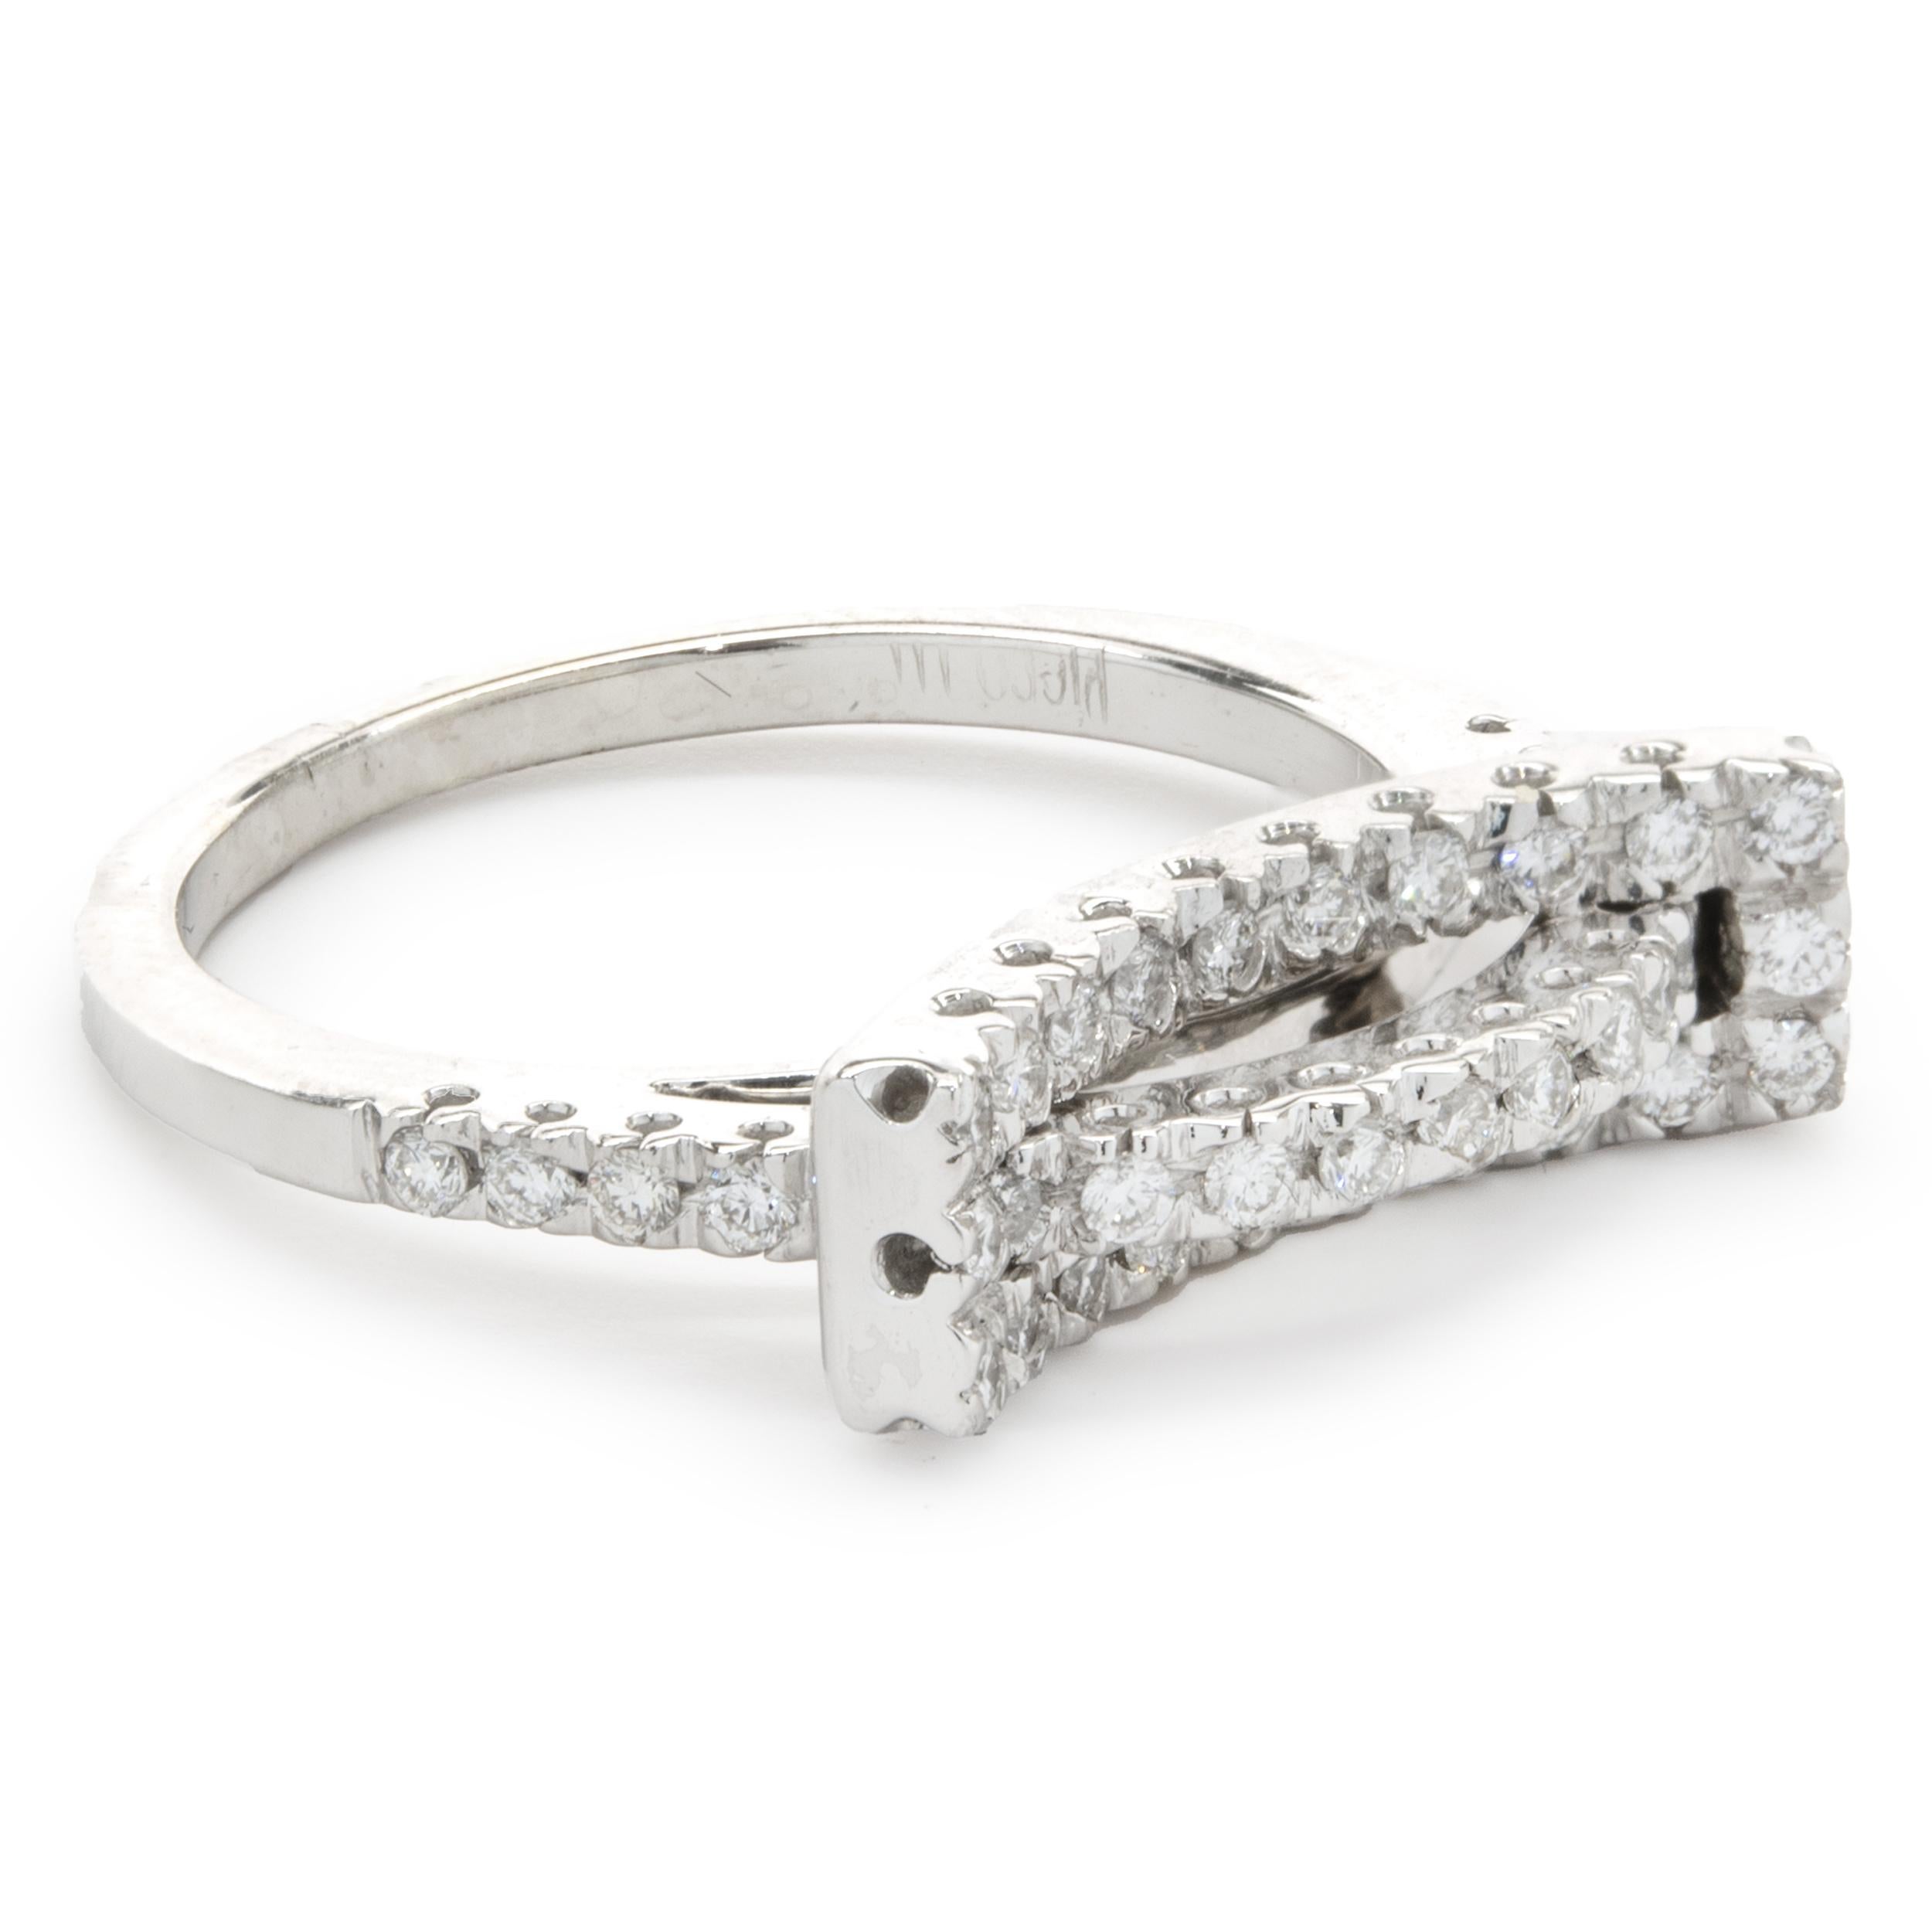 Designer: custom
Material: 14K white gold
Diamond: 39 round brilliant cut = 0.78cttw
Color: G
Clarity: SI1
Ring size: 7.75 (please allow two additional shipping days for sizing requests)
Weight: 5.58 grams